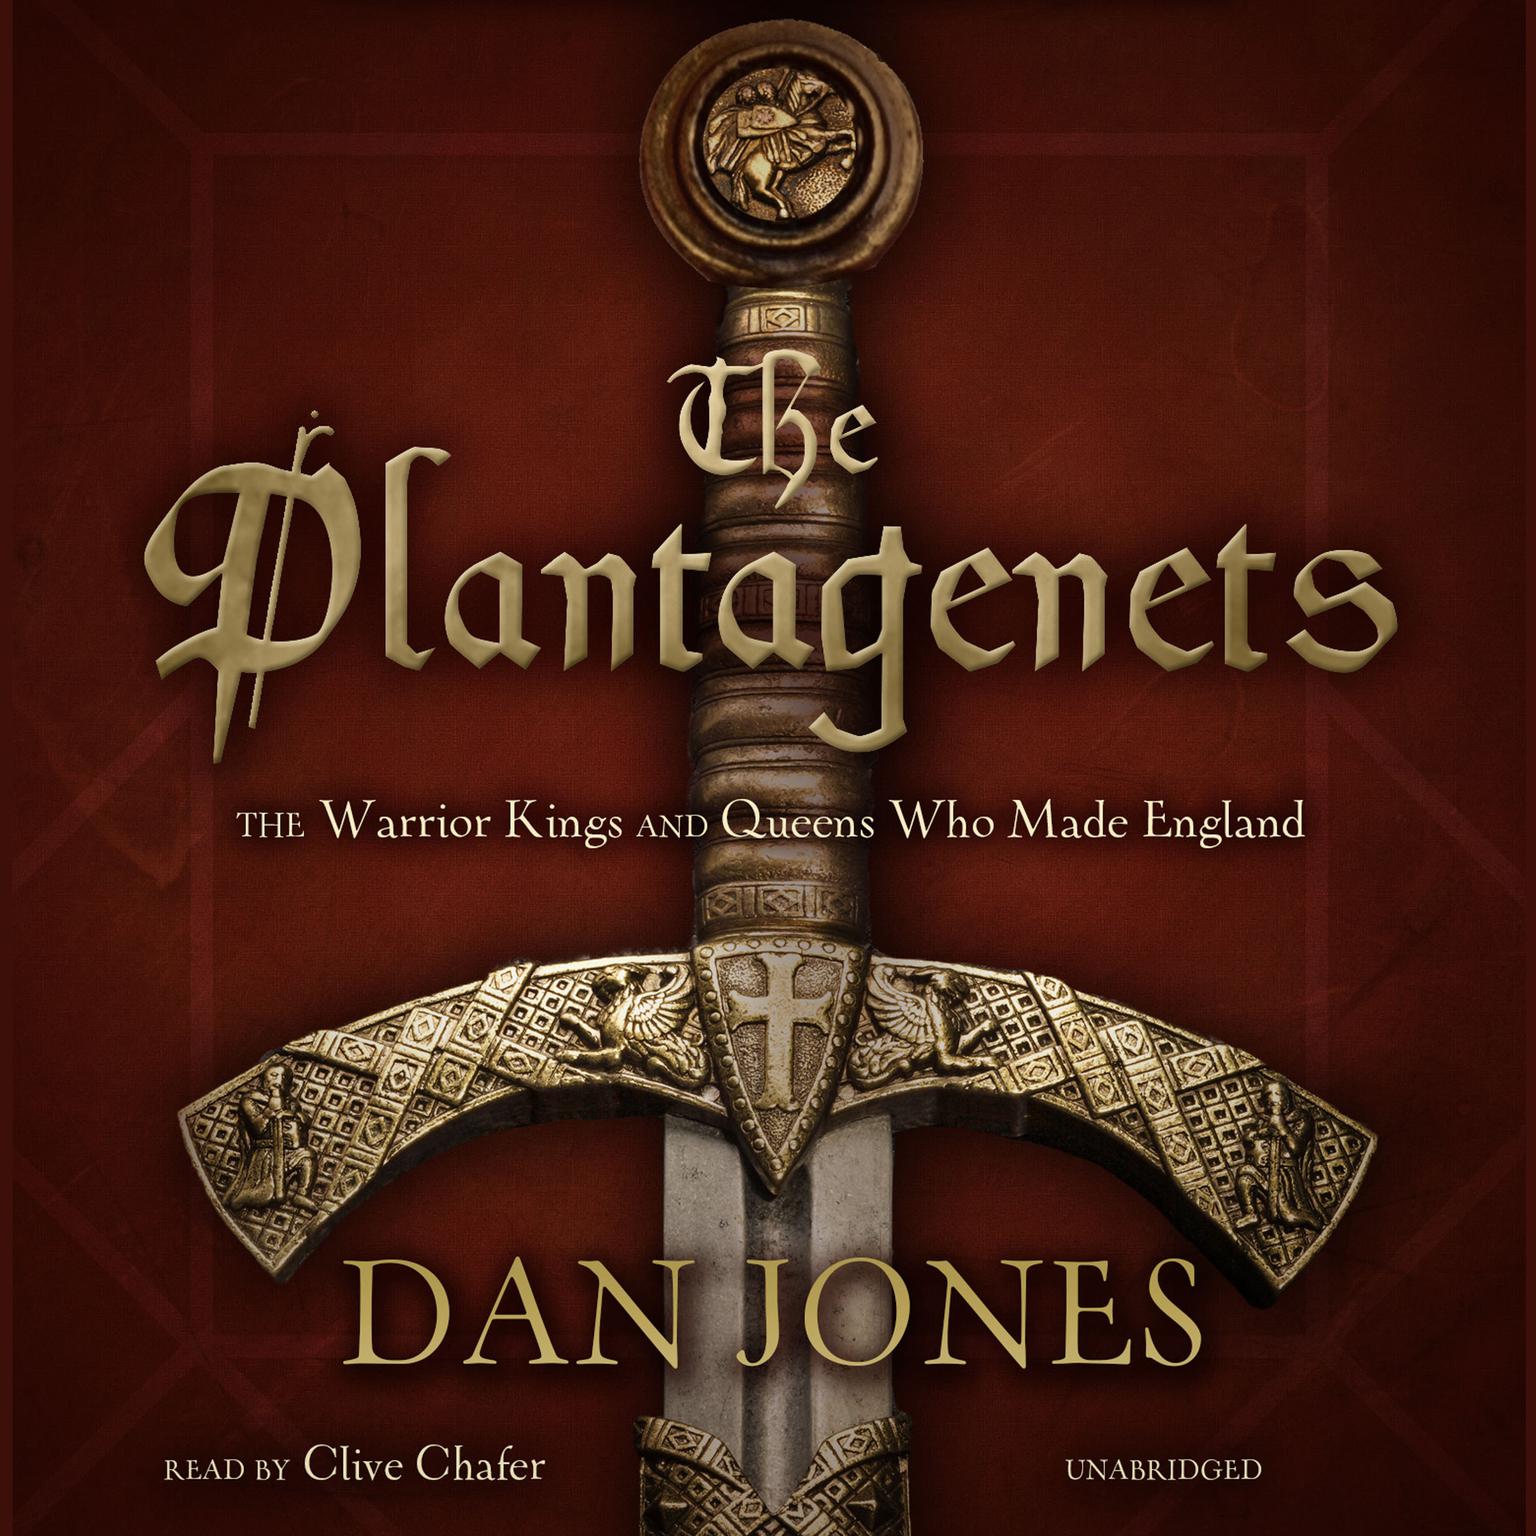 The Plantagenets: The Warrior Kings and Queens Who Made England Audiobook, by Dan Jones